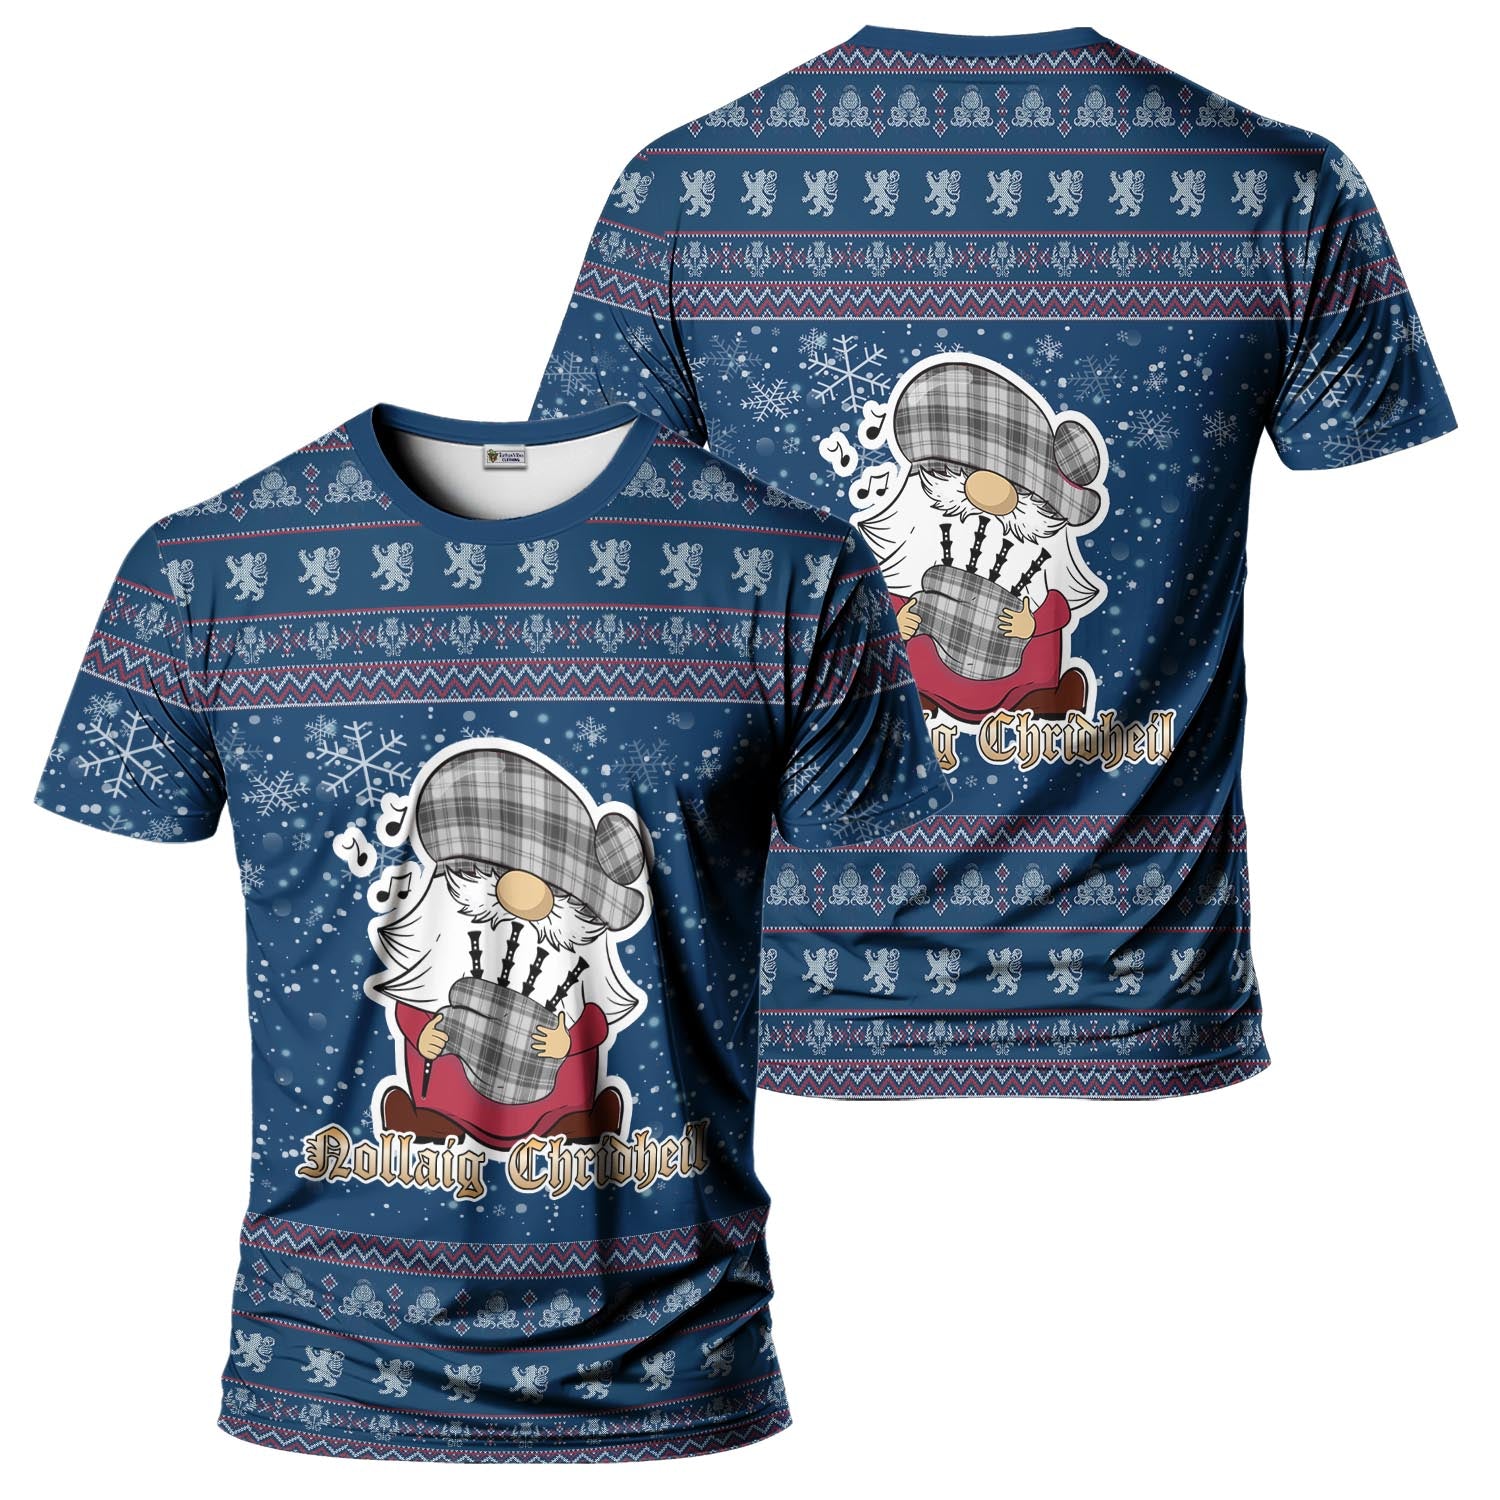 Glendinning Clan Christmas Family T-Shirt with Funny Gnome Playing Bagpipes Kid's Shirt Blue - Tartanvibesclothing